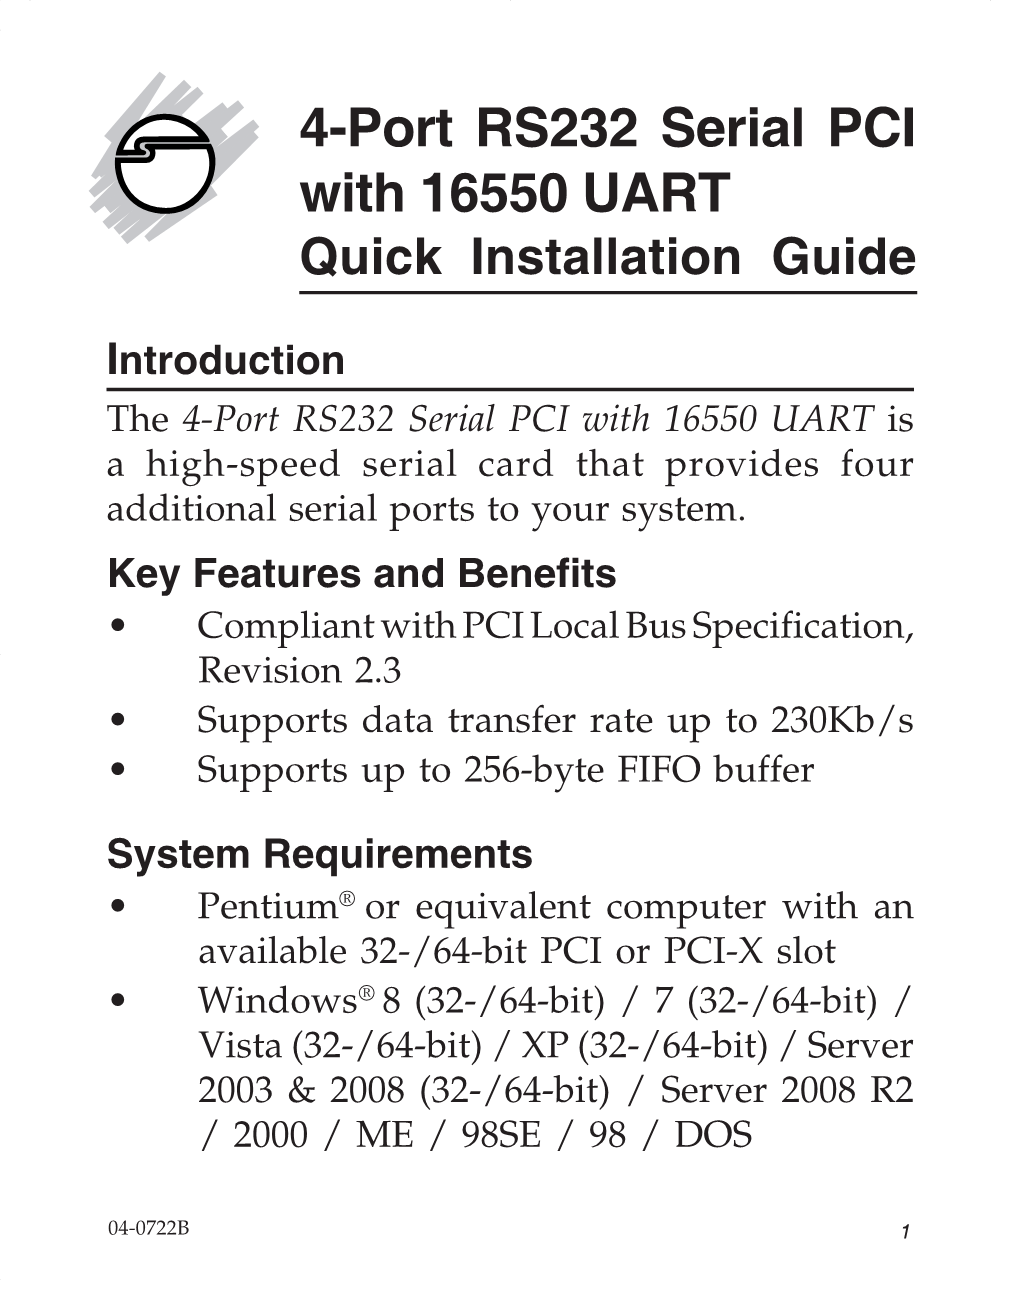 4-Port RS232 Serial PCI with 16550 UART Quick Installation Guide